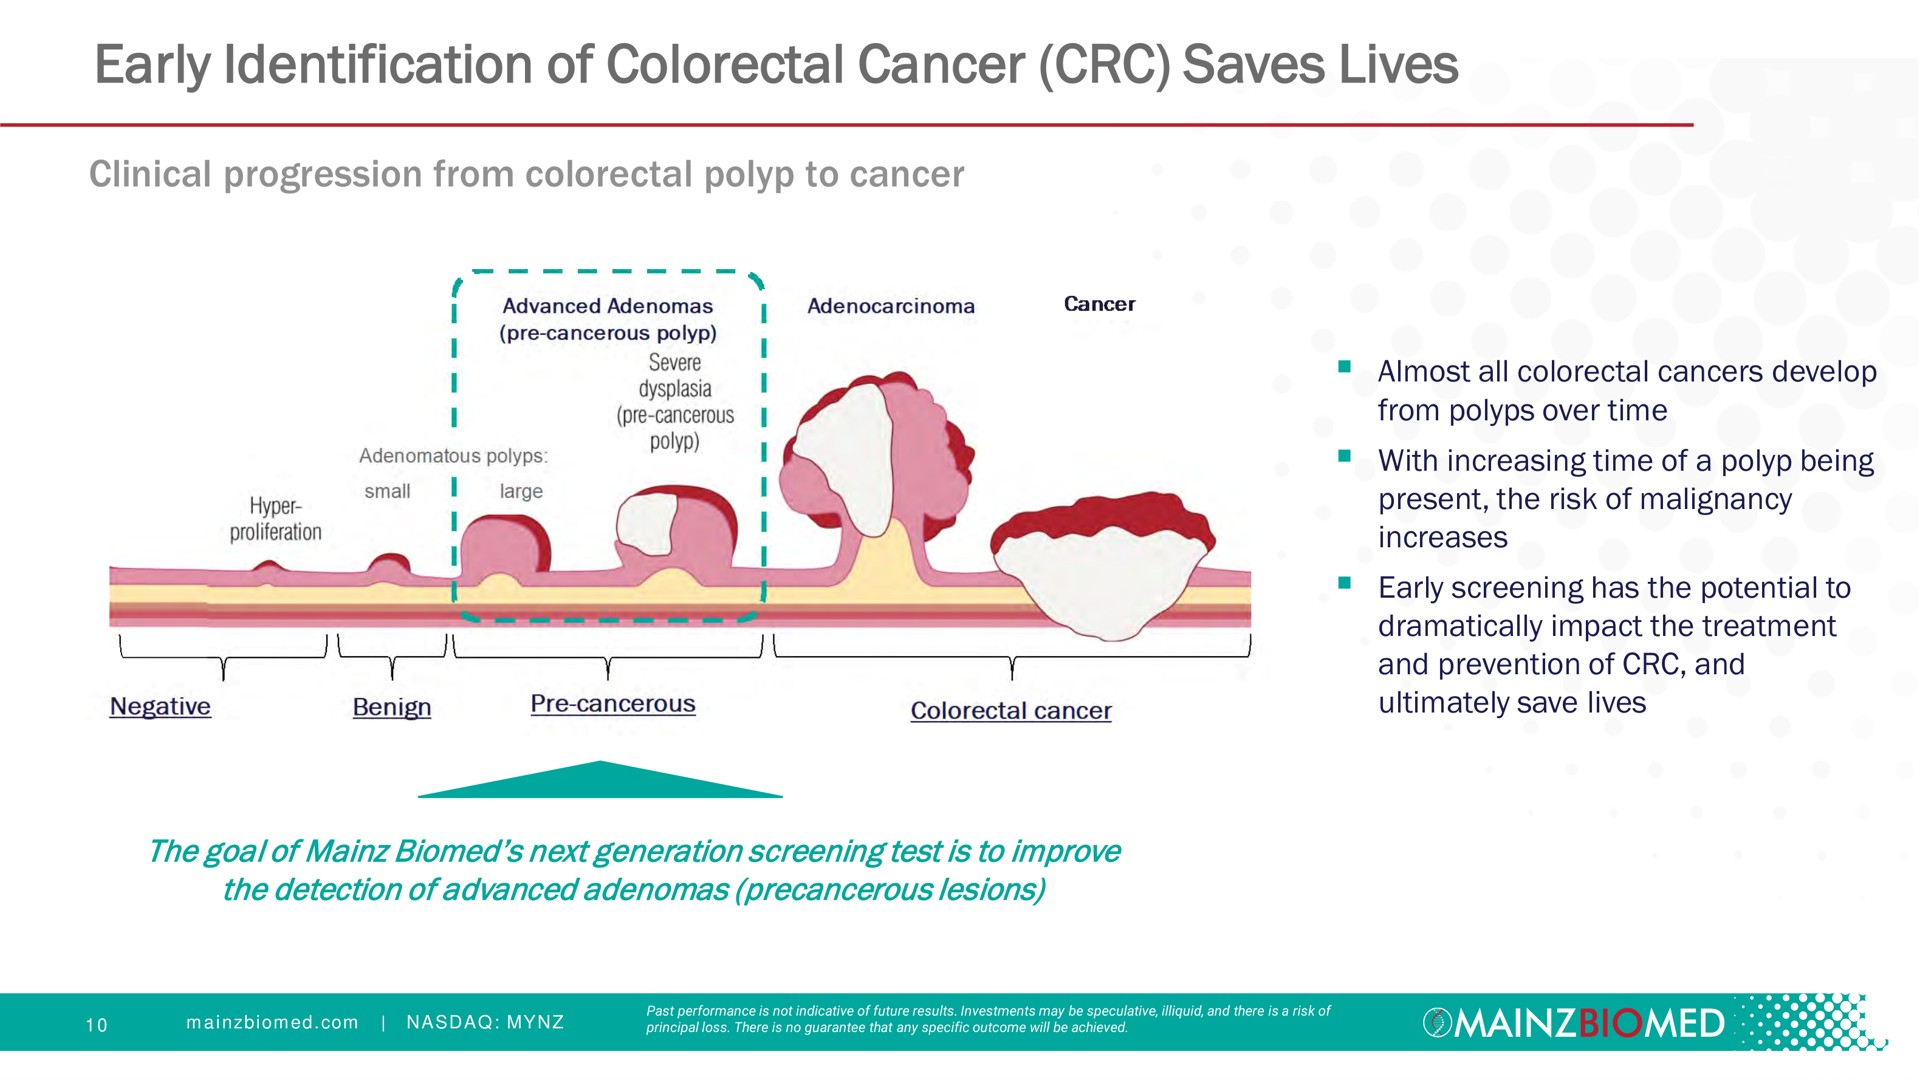 early identification of cancer saves lives | Mainz Biomed NV